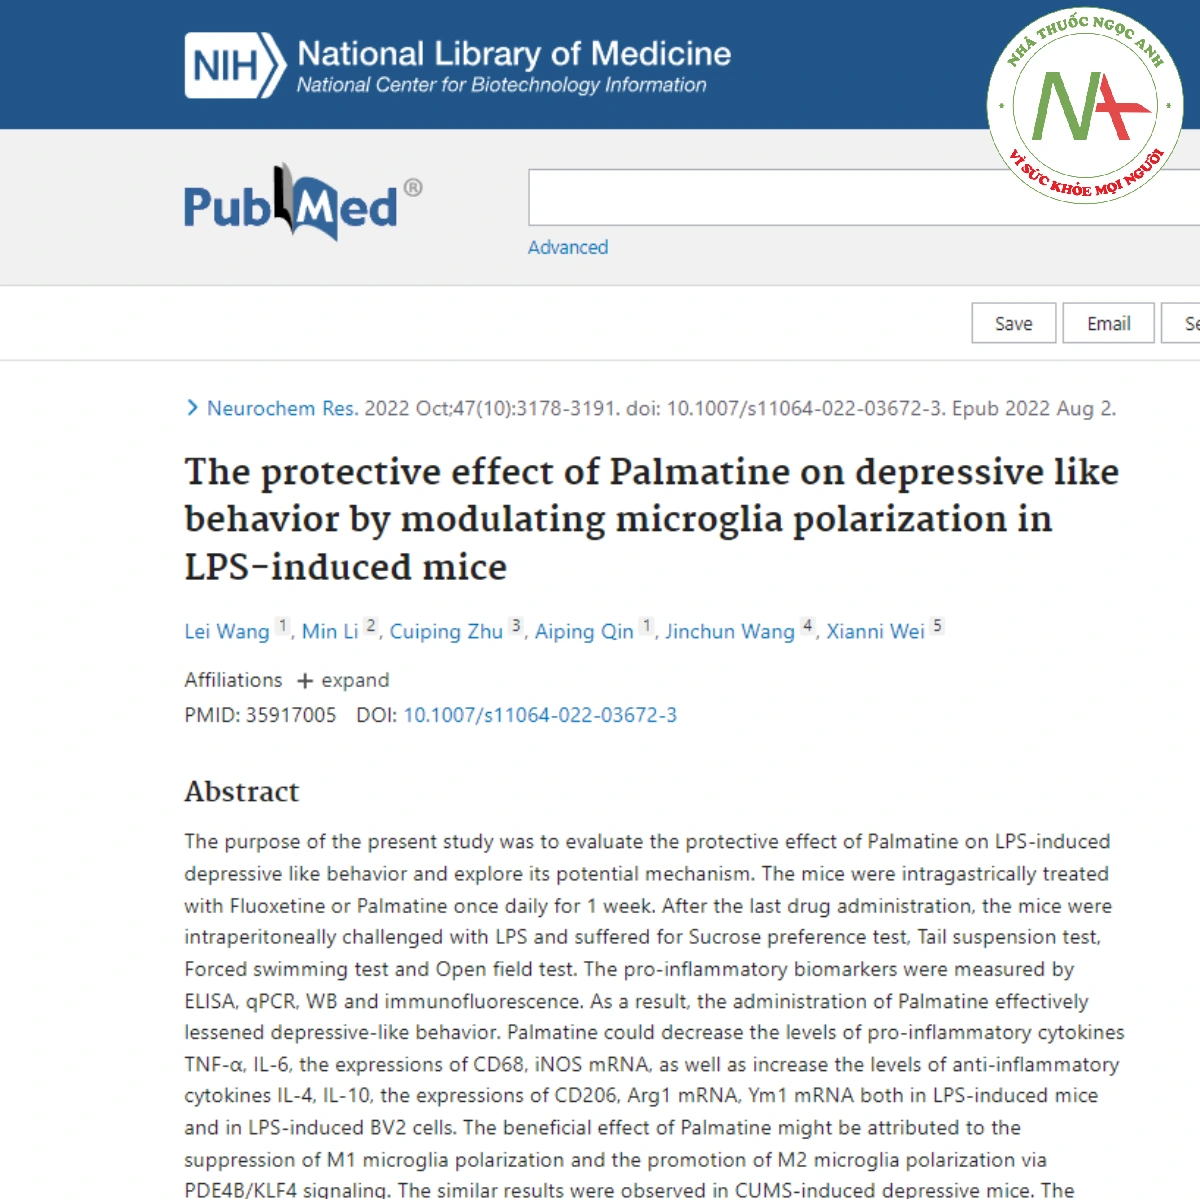 The protective effect of Palmatine on depressive like behavior by modulating microglia polarization in LPS-induced mice